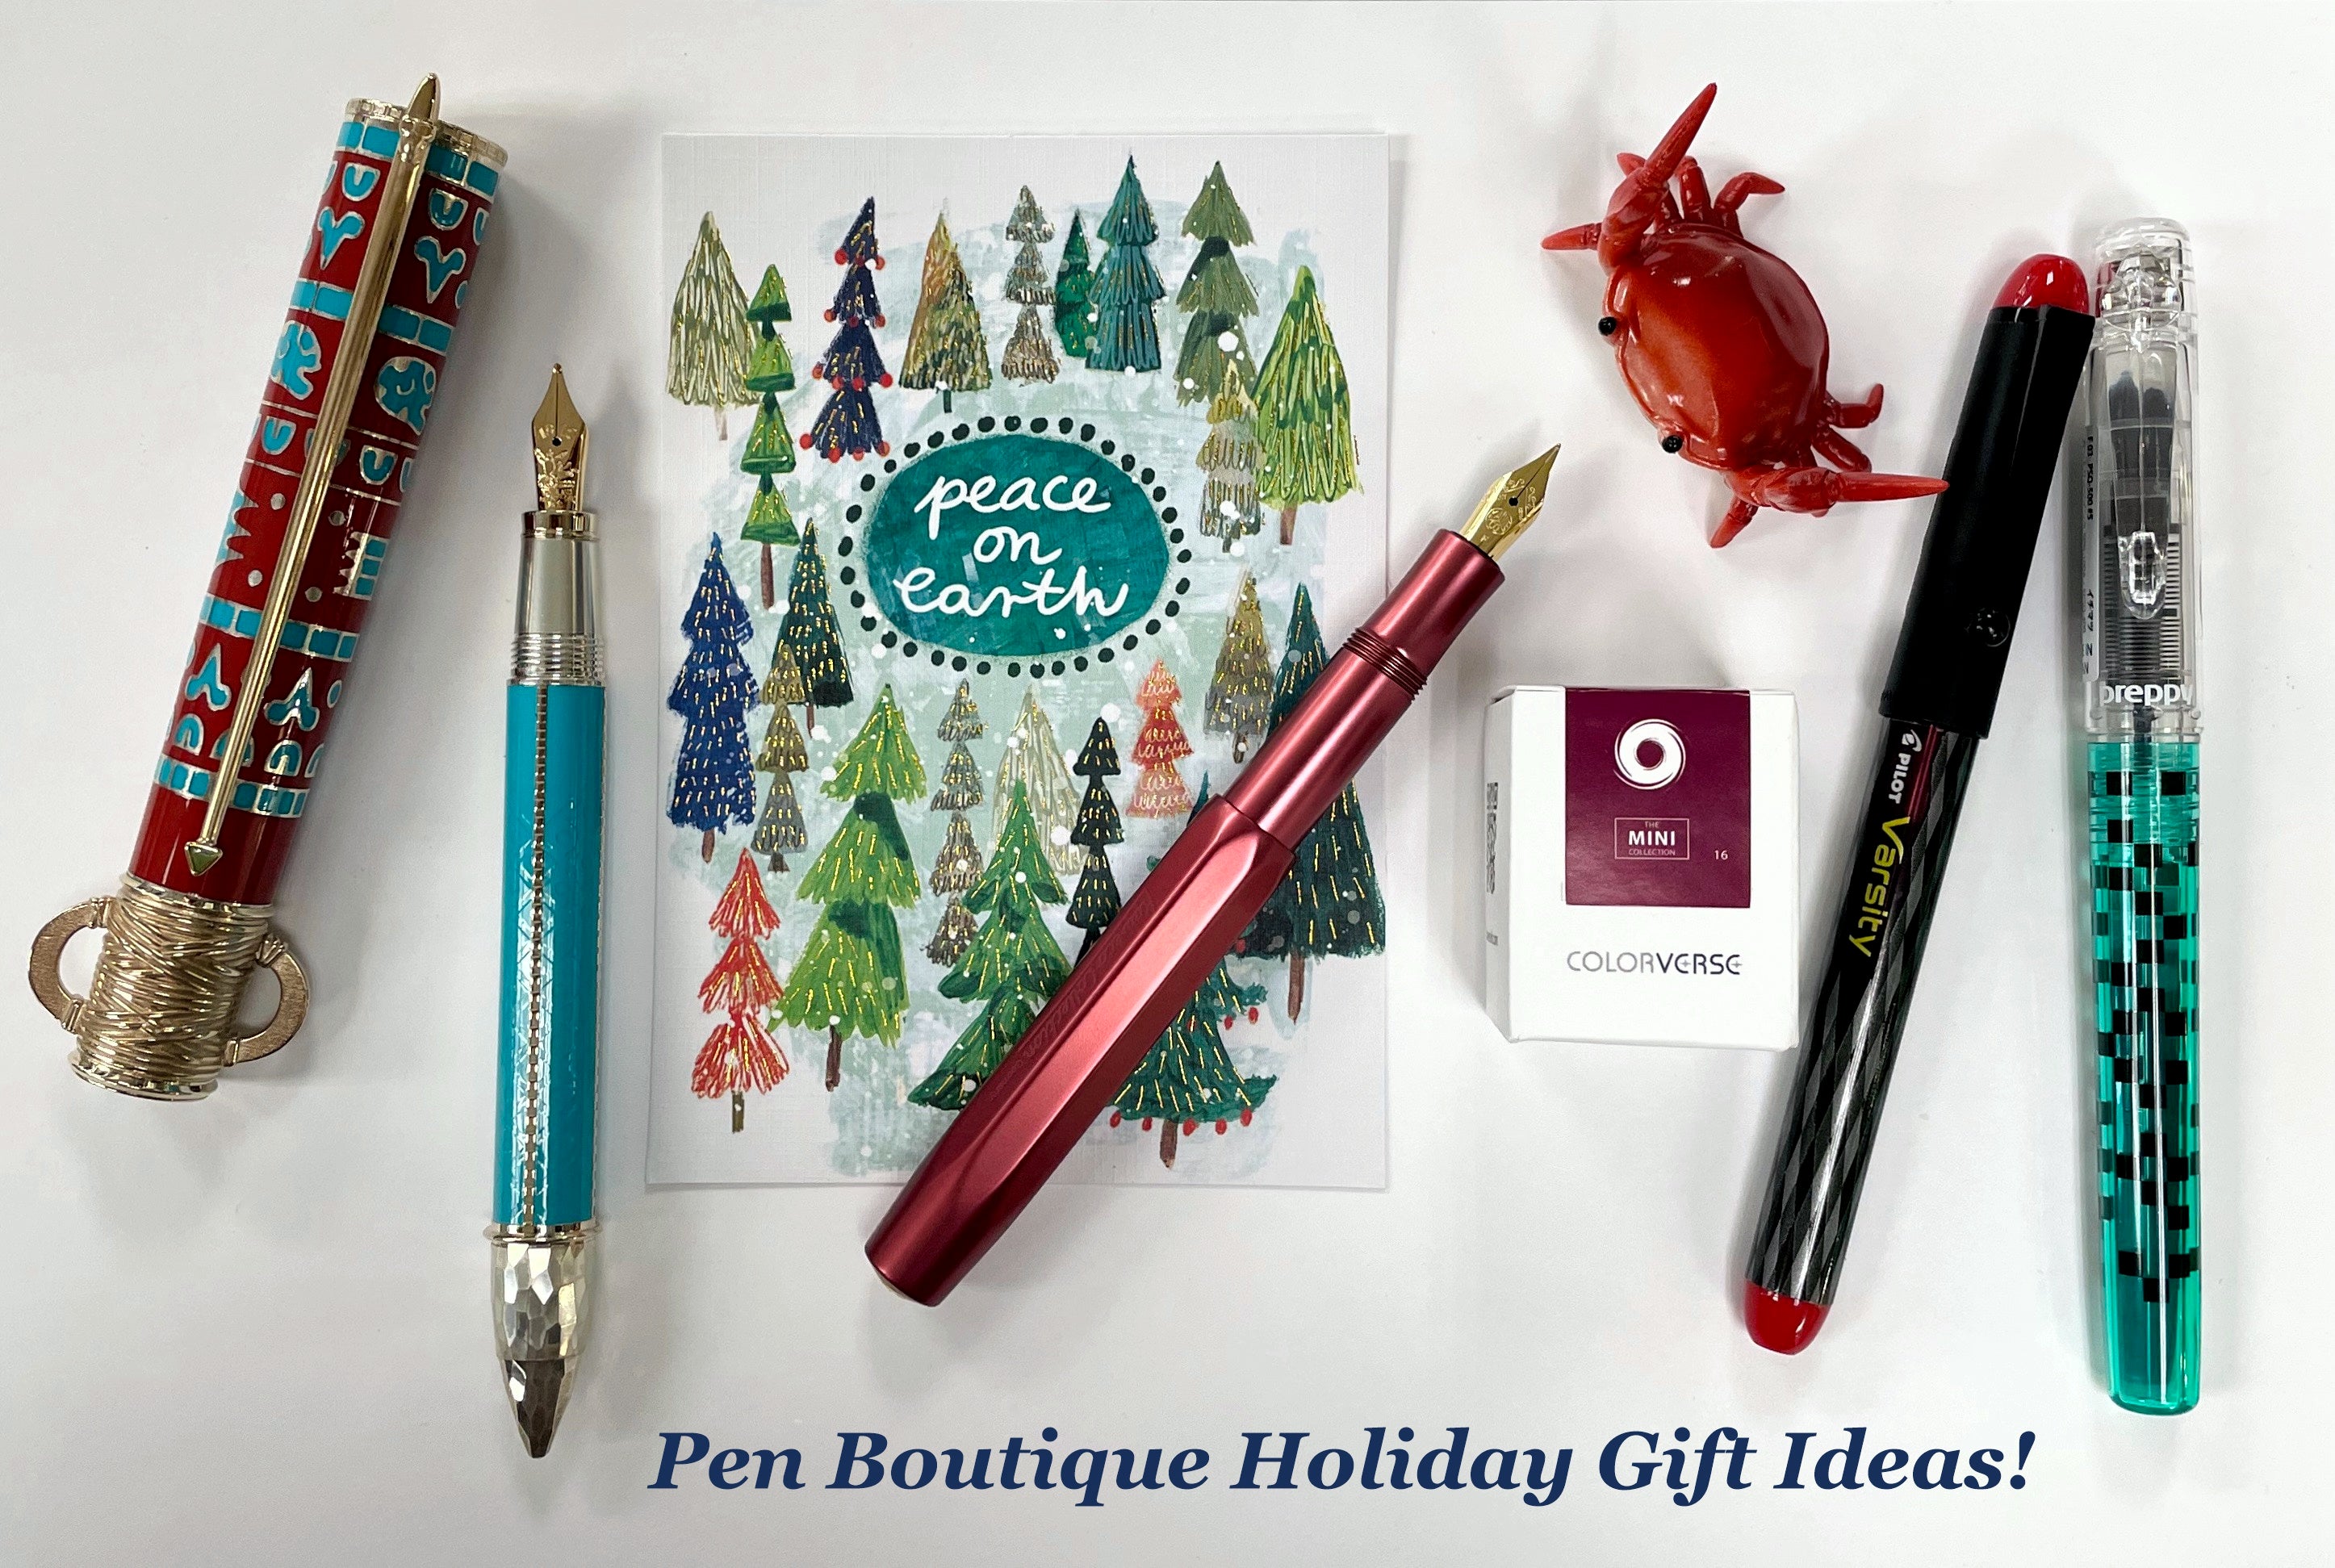 Holiday Time at Pen Boutique!